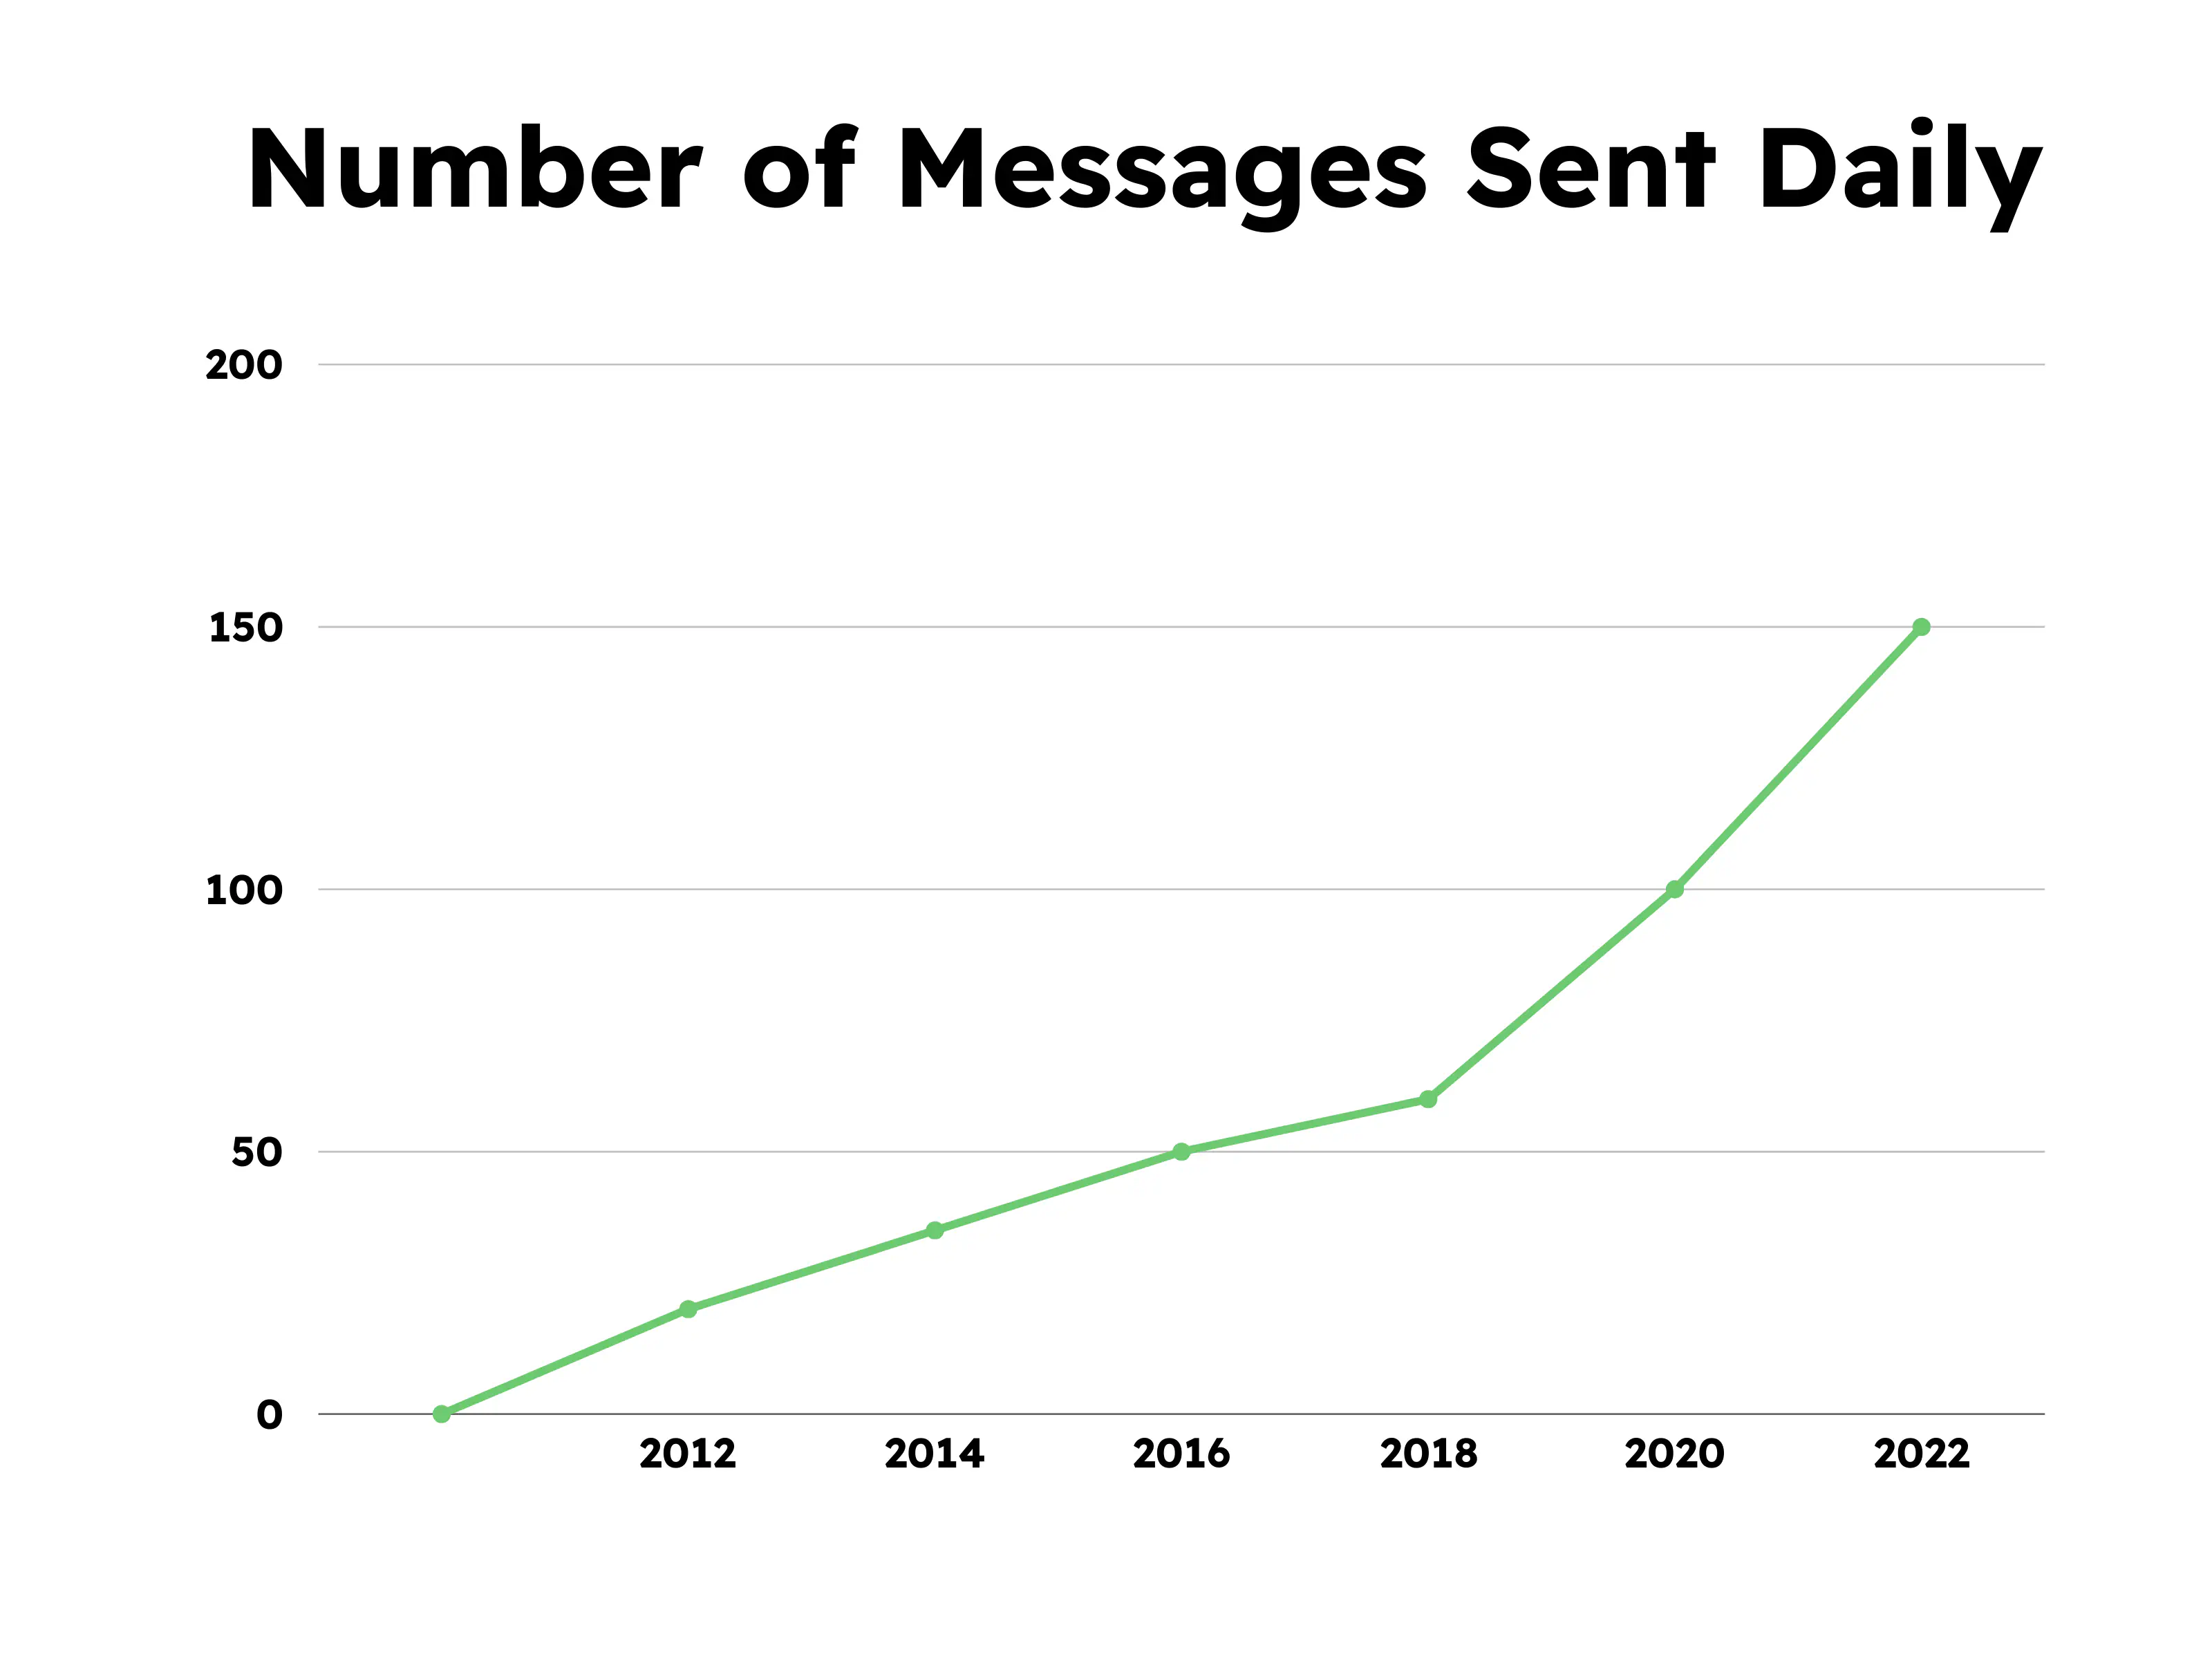 Number of WhatsApp Messages Sent Daily